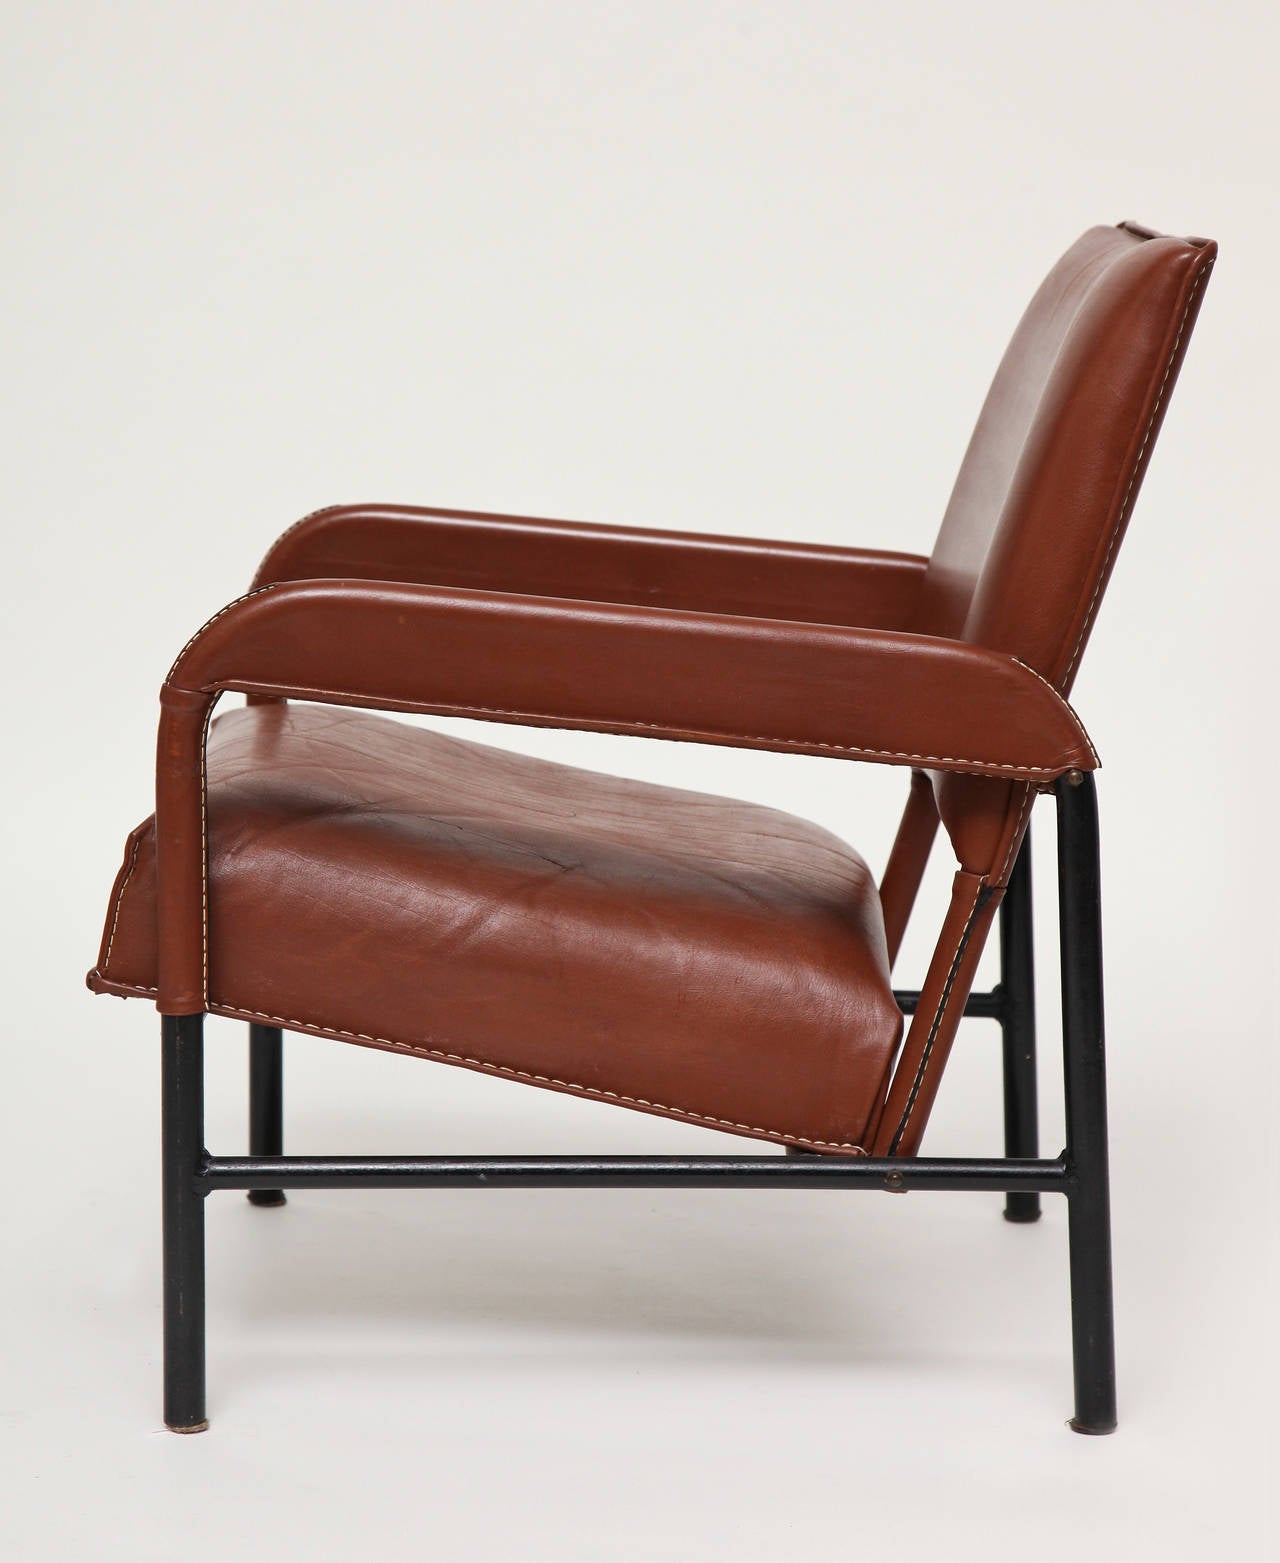 French Set of Three Midcentury Leather Armchairs in the manner of Adnet, France, c 1955 For Sale